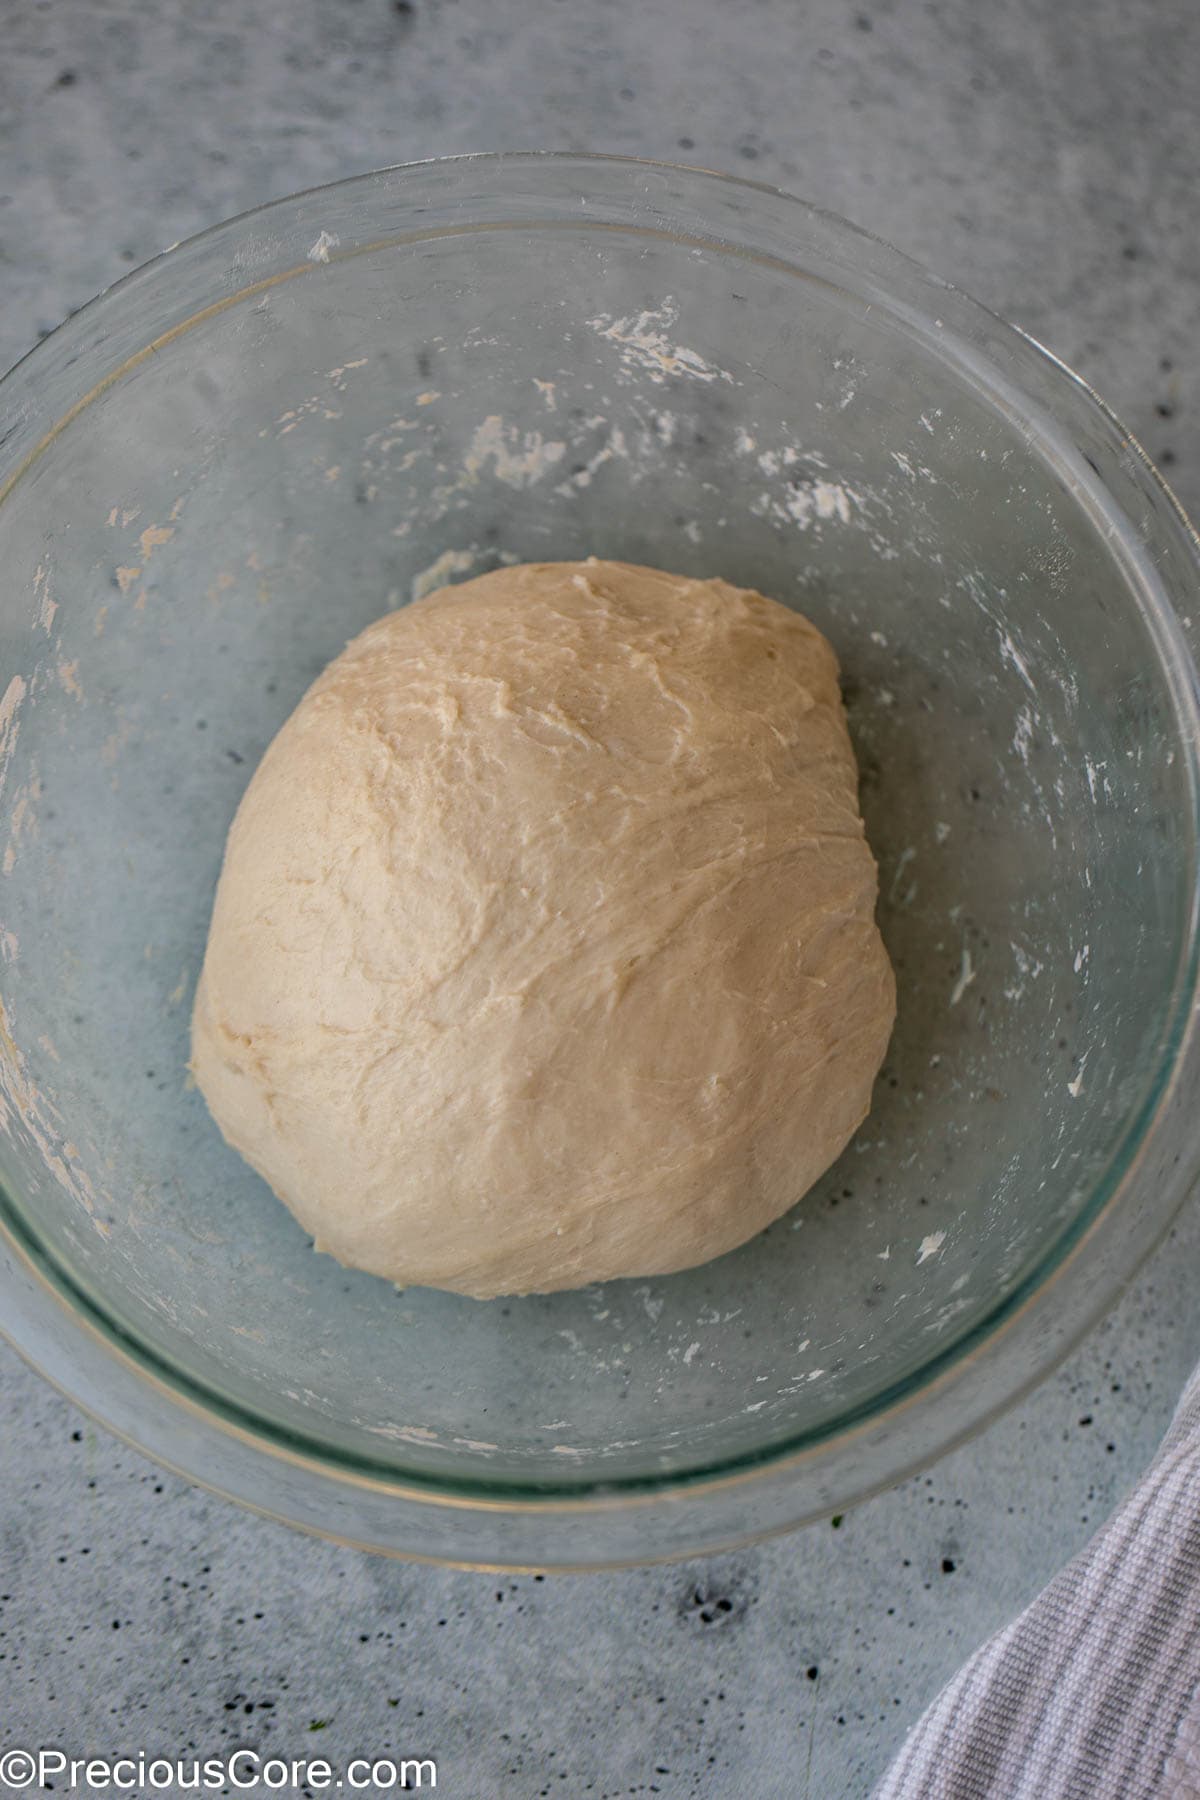 Smooth bread dough in a glass bowl.